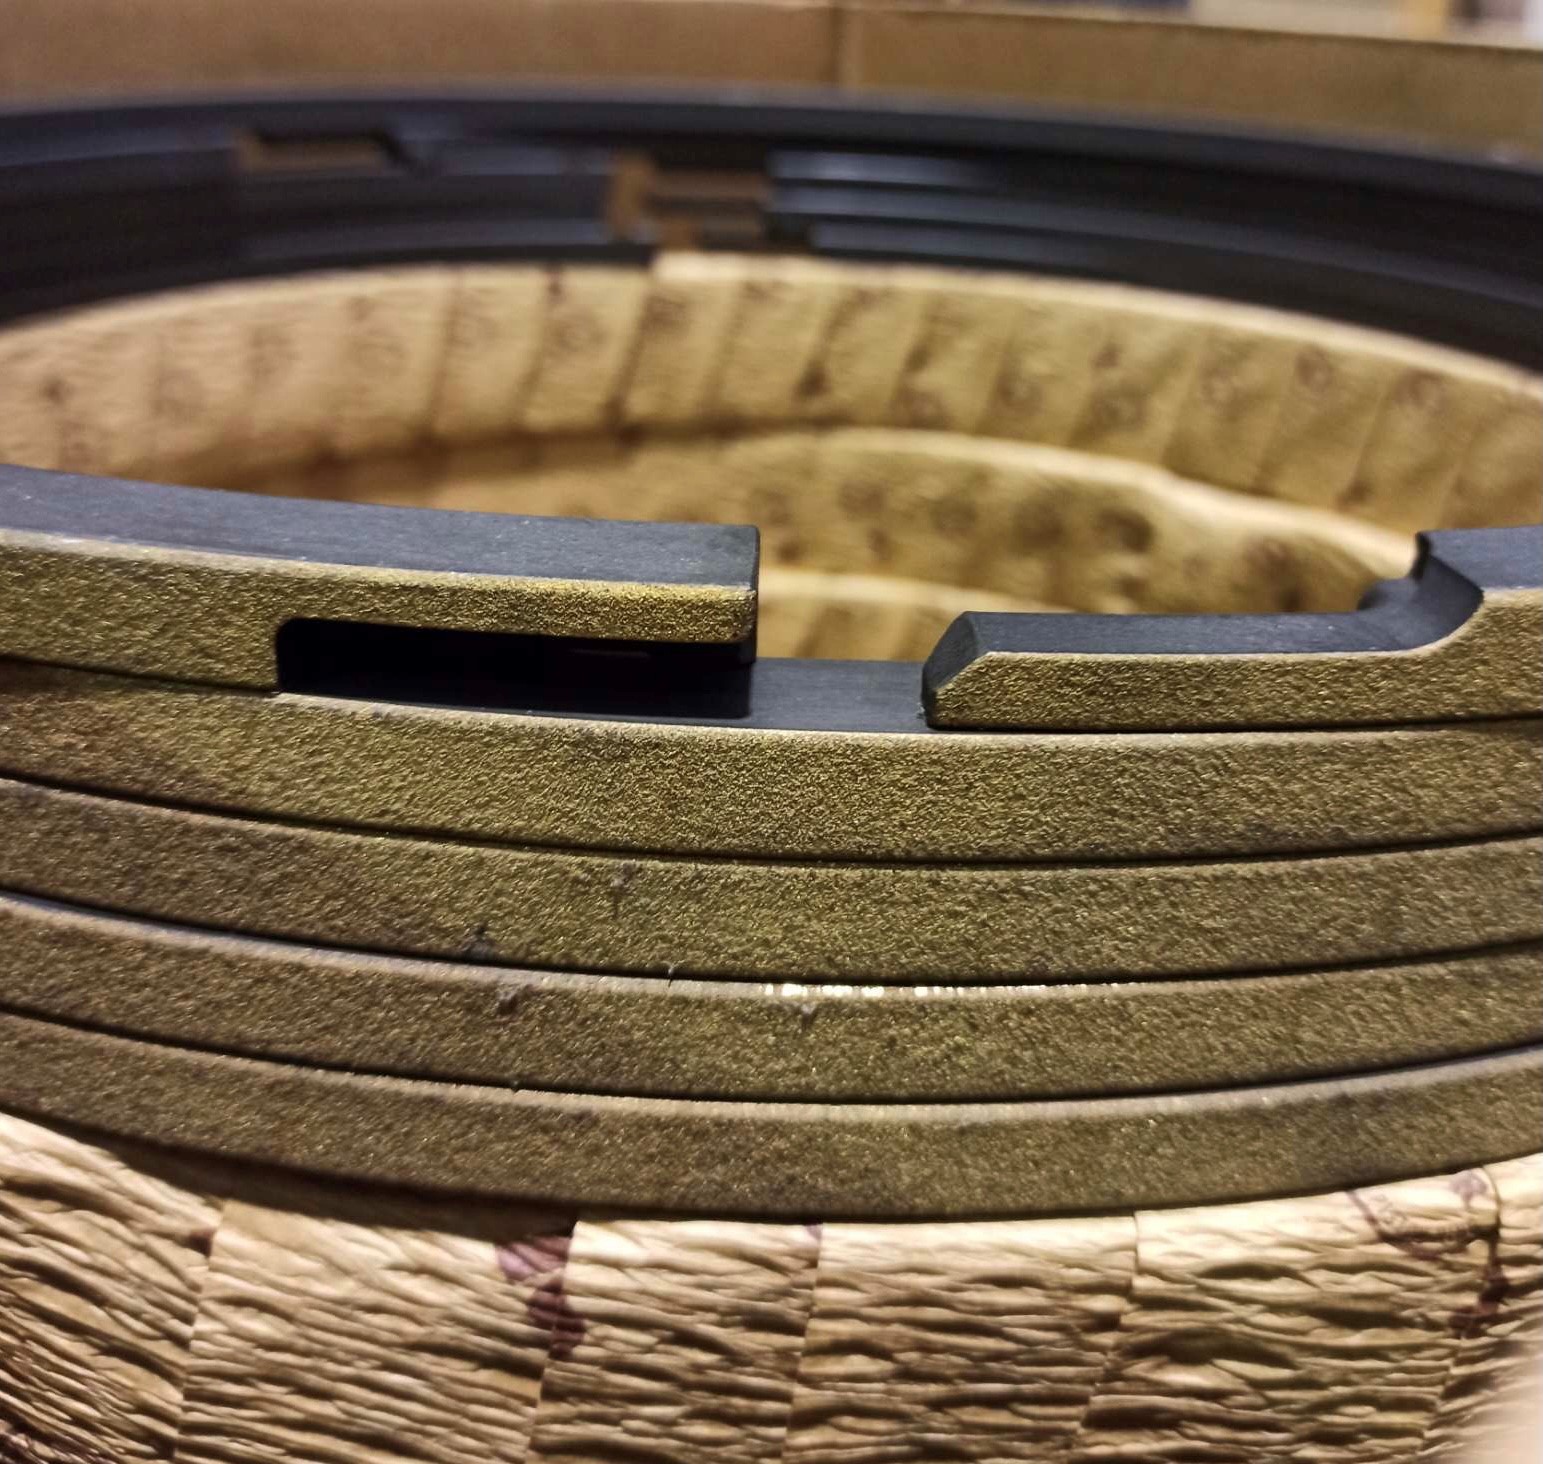 We are stronger than ever in the piston rings market! New batches of large bore piston rings arriving in monthly basis. You may send your enquiries for cermet/alu , alu or cast iron piston rings to info@technoindex.gr. Popular diameters: 350, 420, 500, 600, 700 mm.